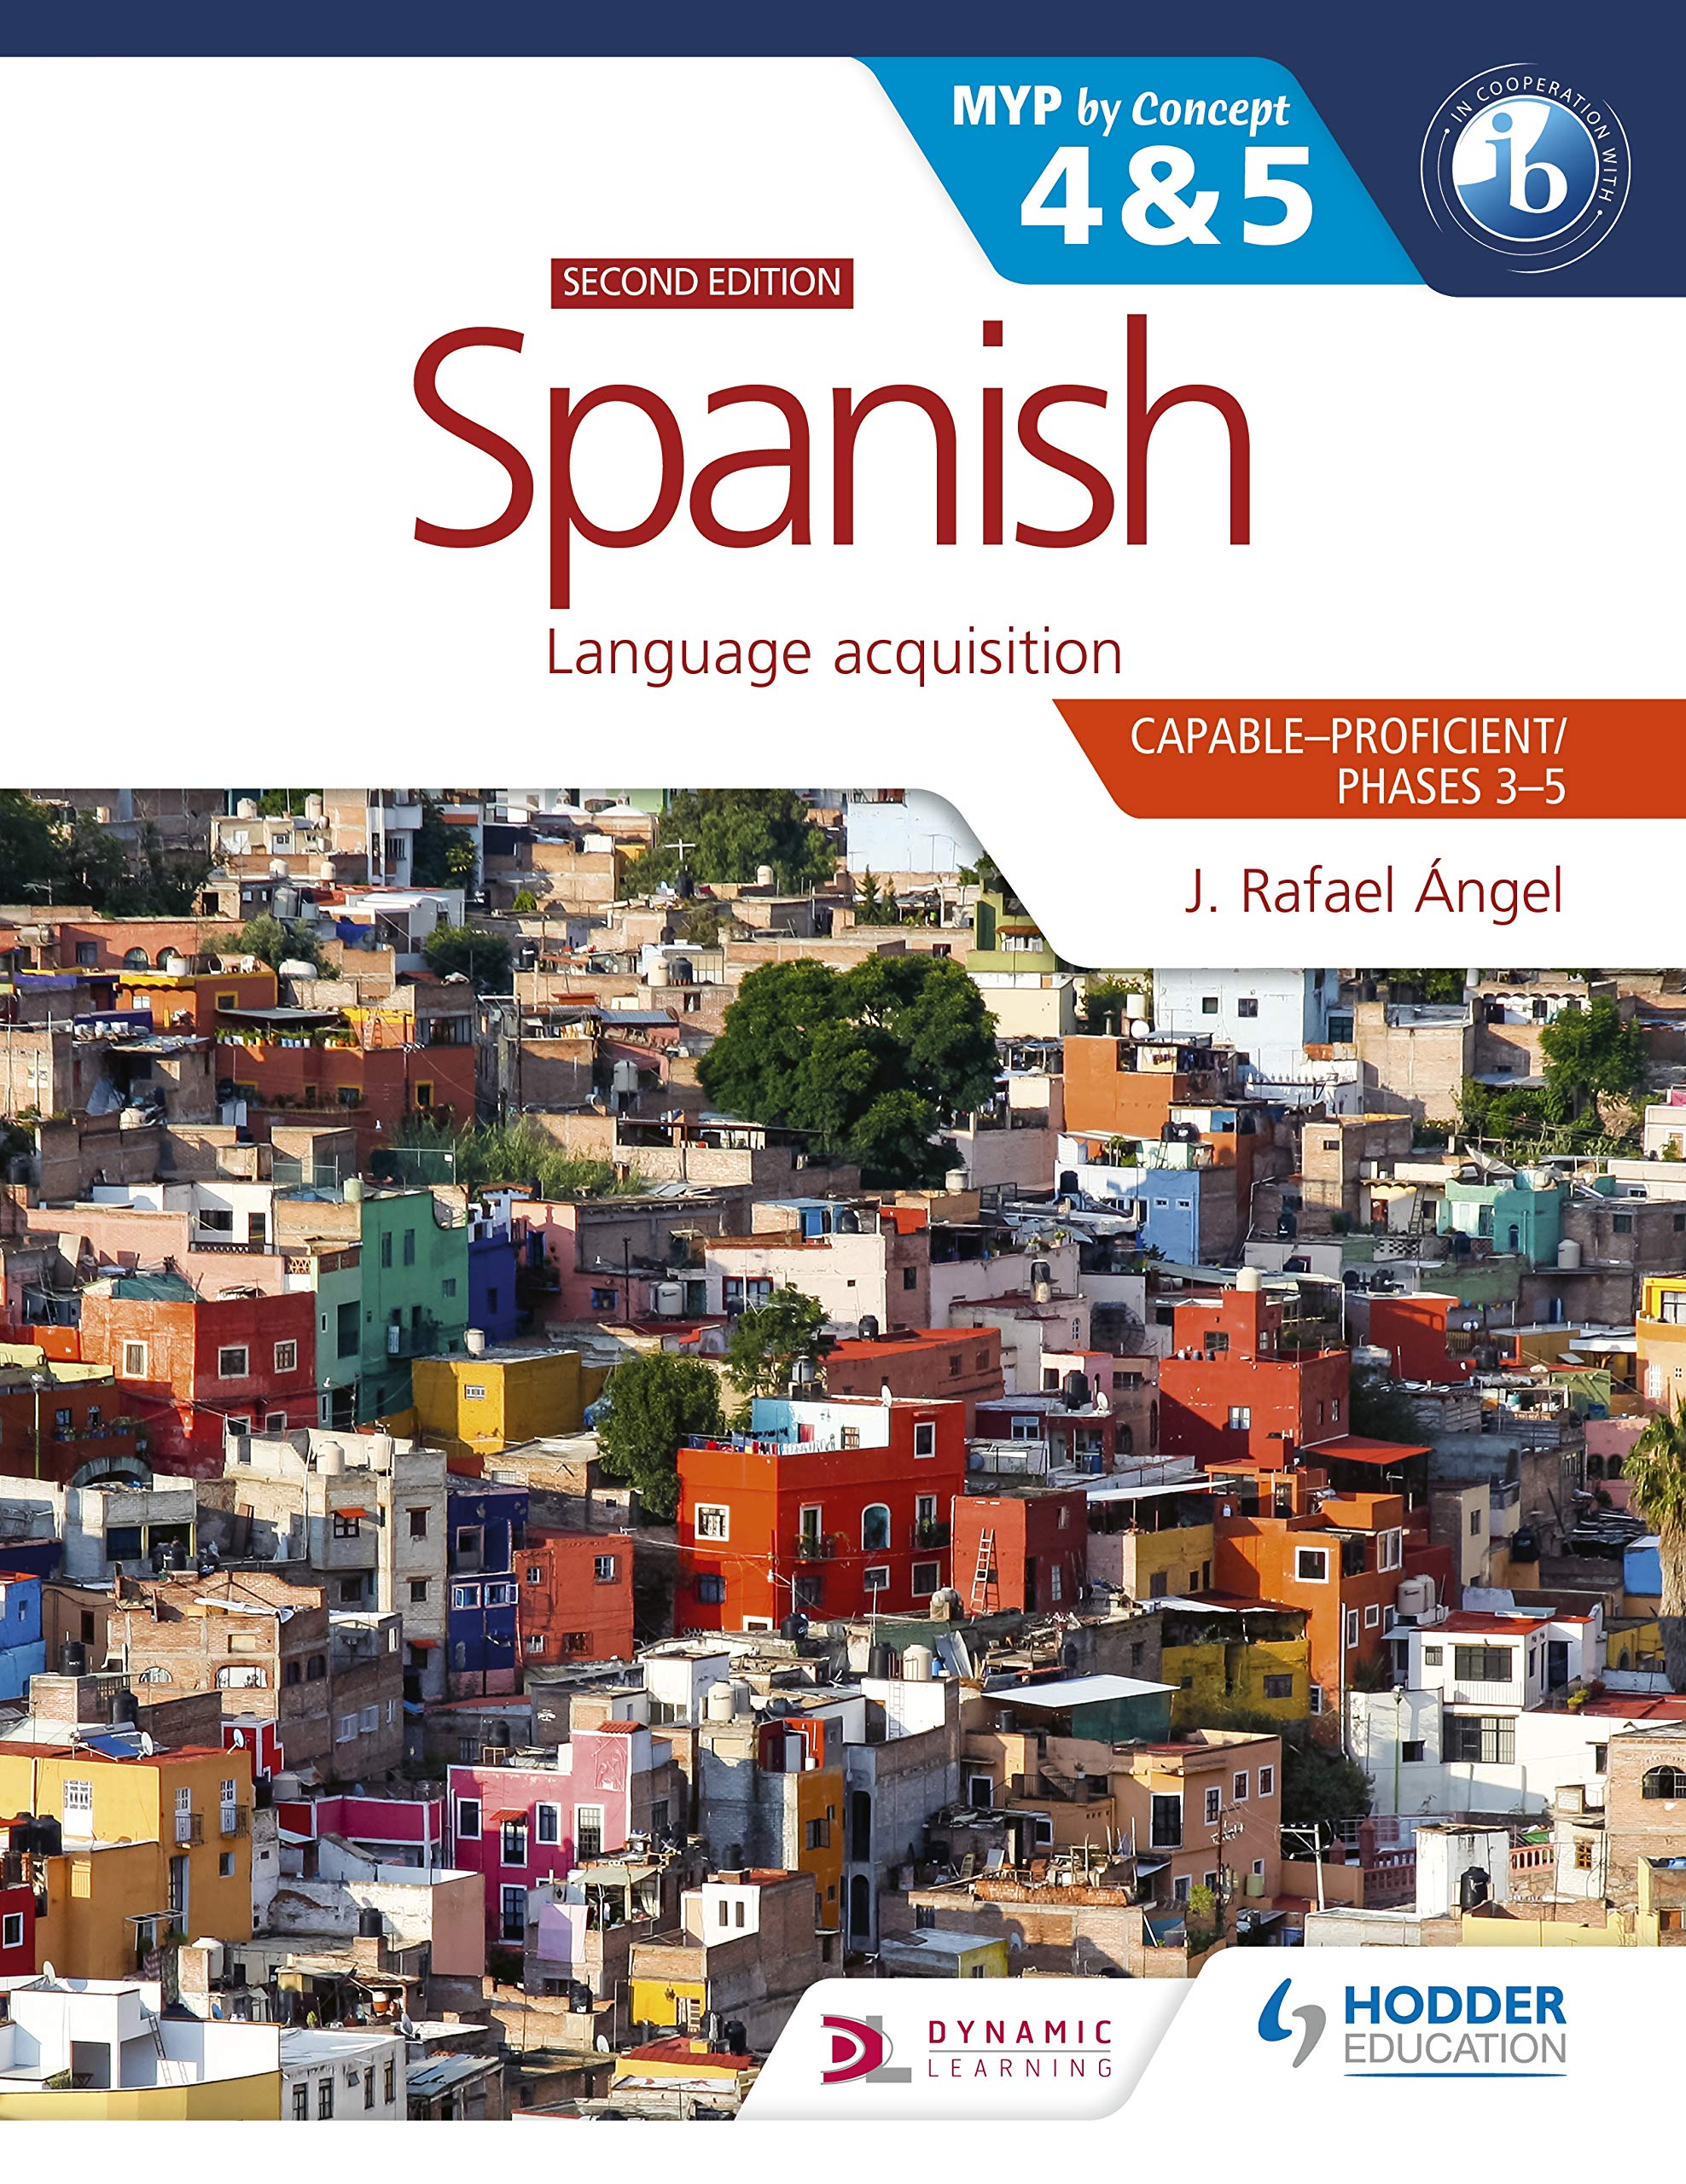 Hodder Spanish for the IB MYP 4&5 (Capable-Proficient/Phases 3-4, 5-6): MYP by Concept Second Edition:By J. Rafael Angel